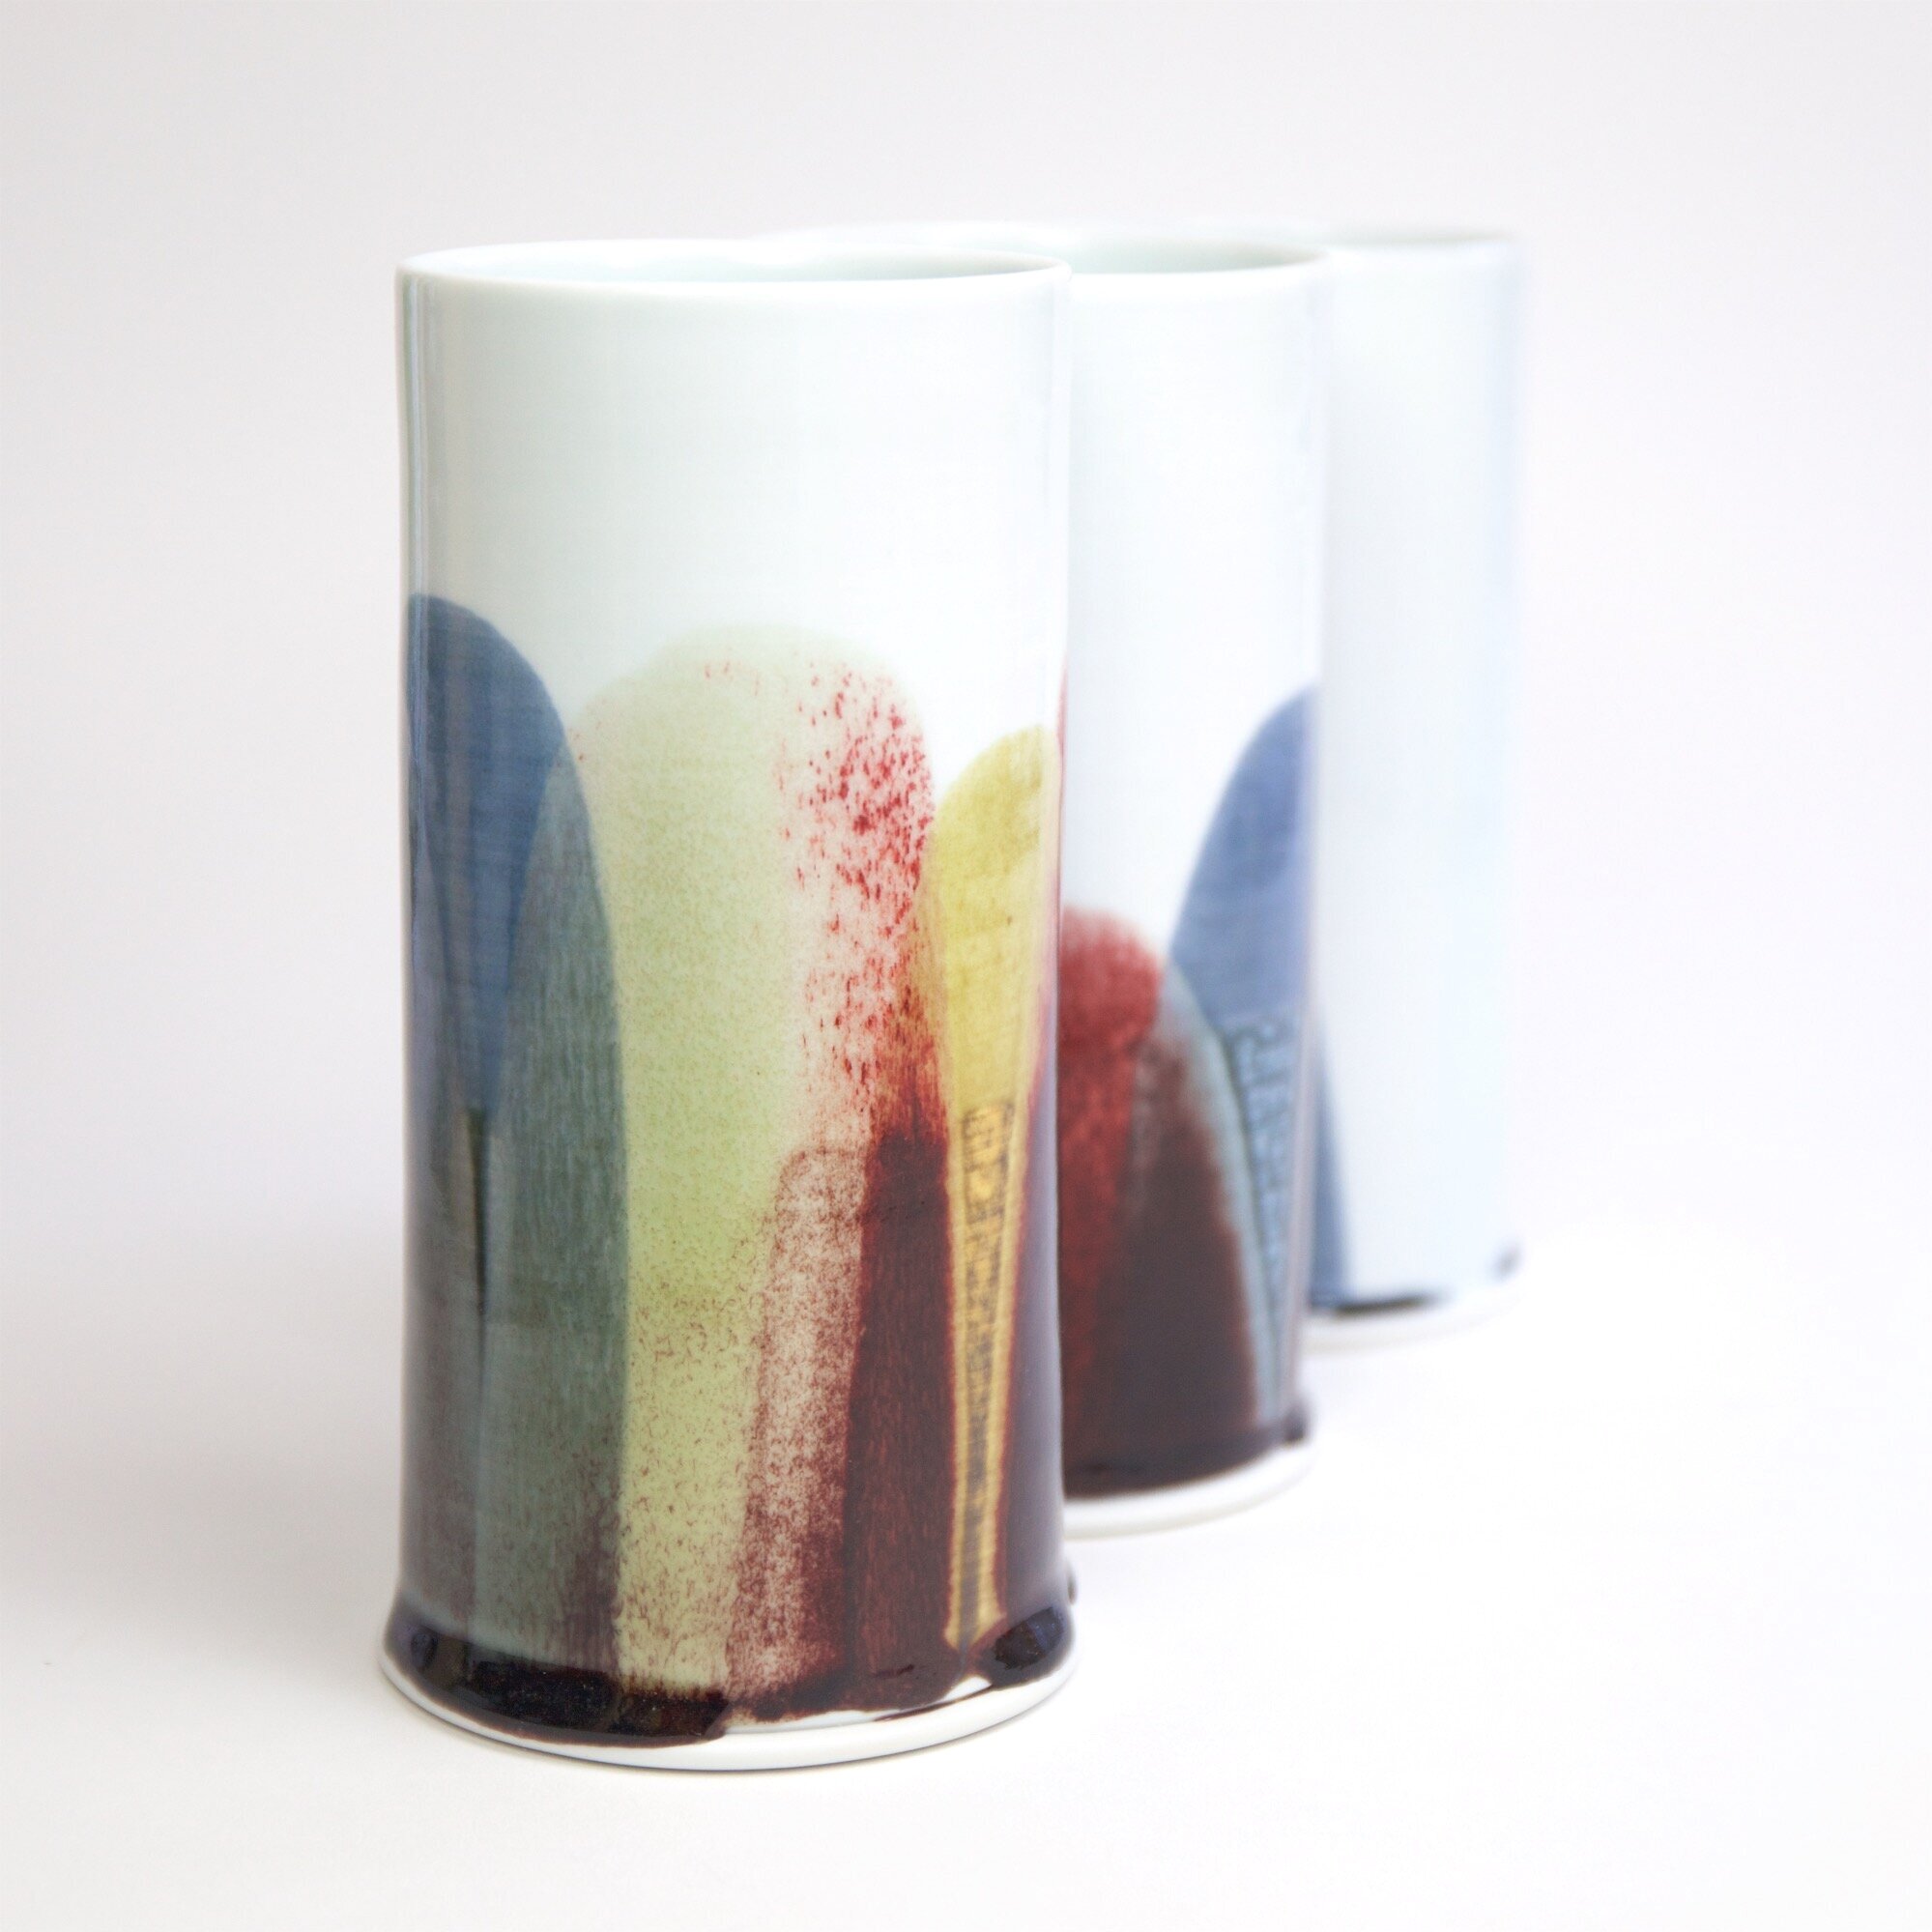 Porcelain Vase ‘Earth, Fire and Water ’ collection